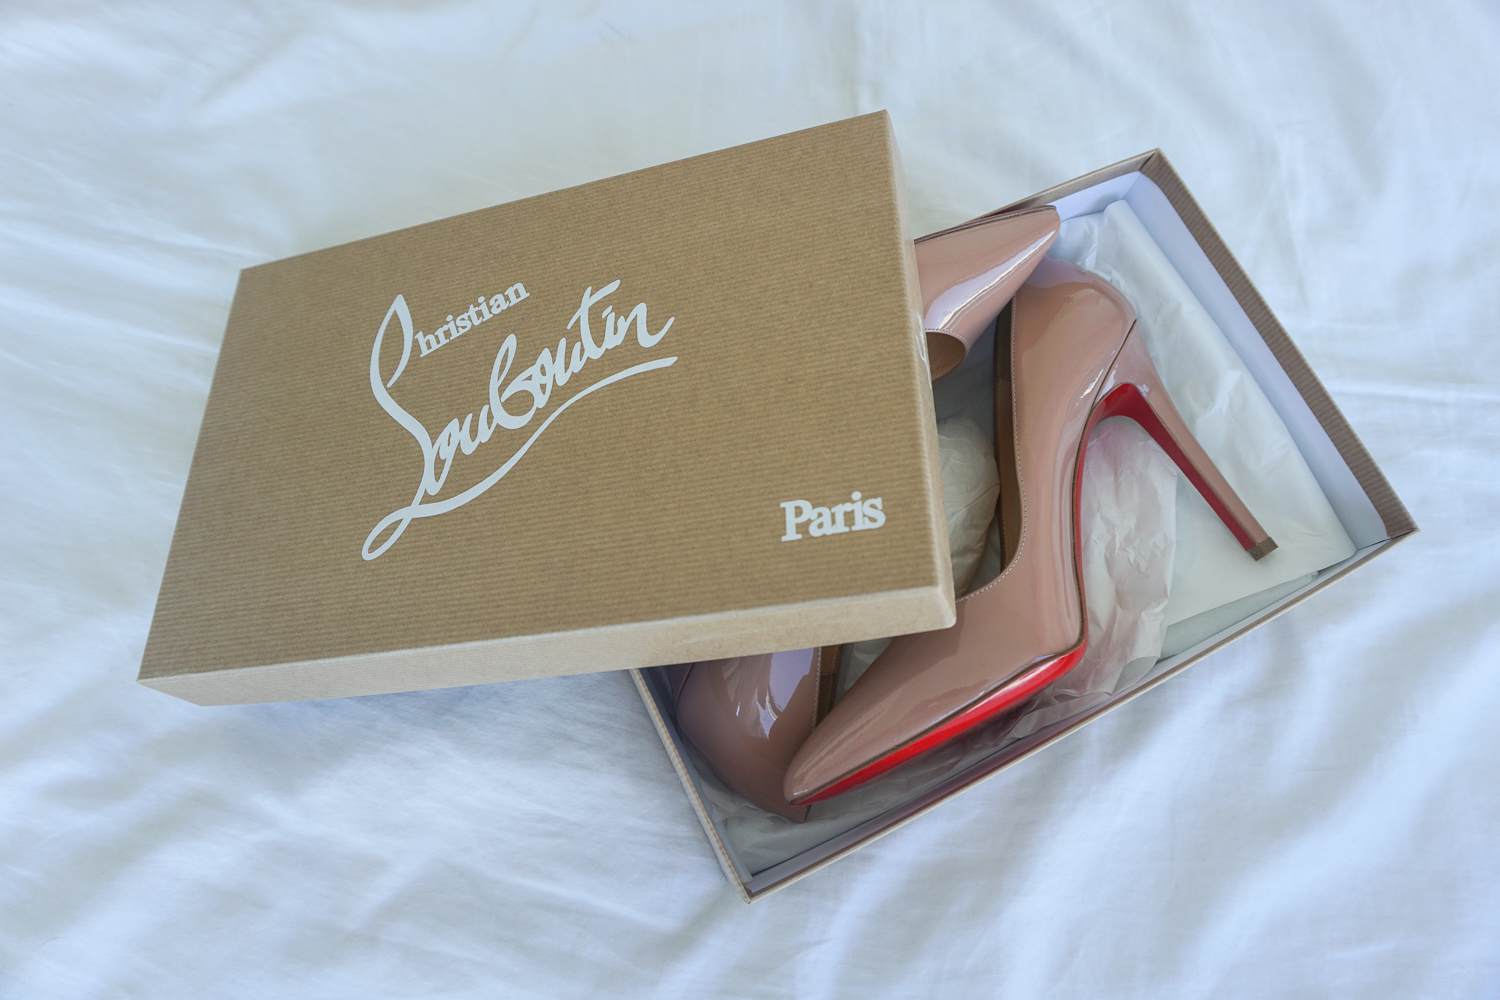 What To Know Before Buying Your First Pair Of Christian Louboutin